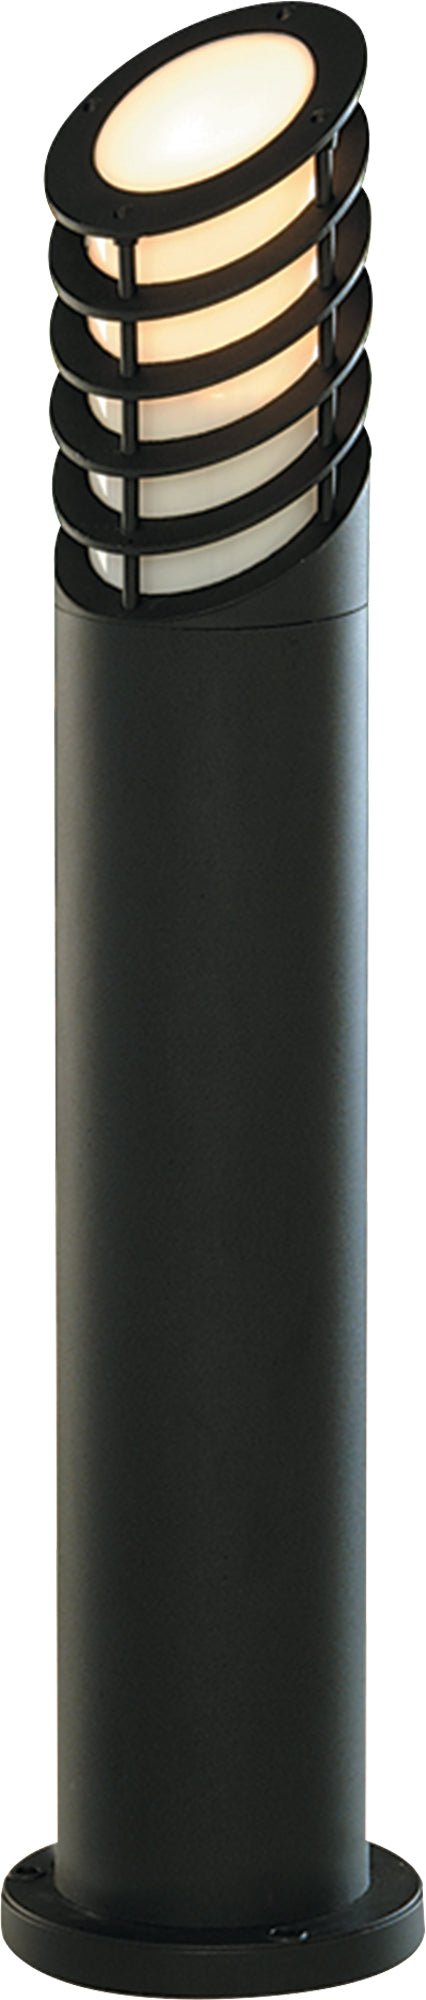 Searchlight 1086-730 Bollards Outdoor Post - Black Metal & White Polycarbonate - Searchlight - Falcon Electrical UK